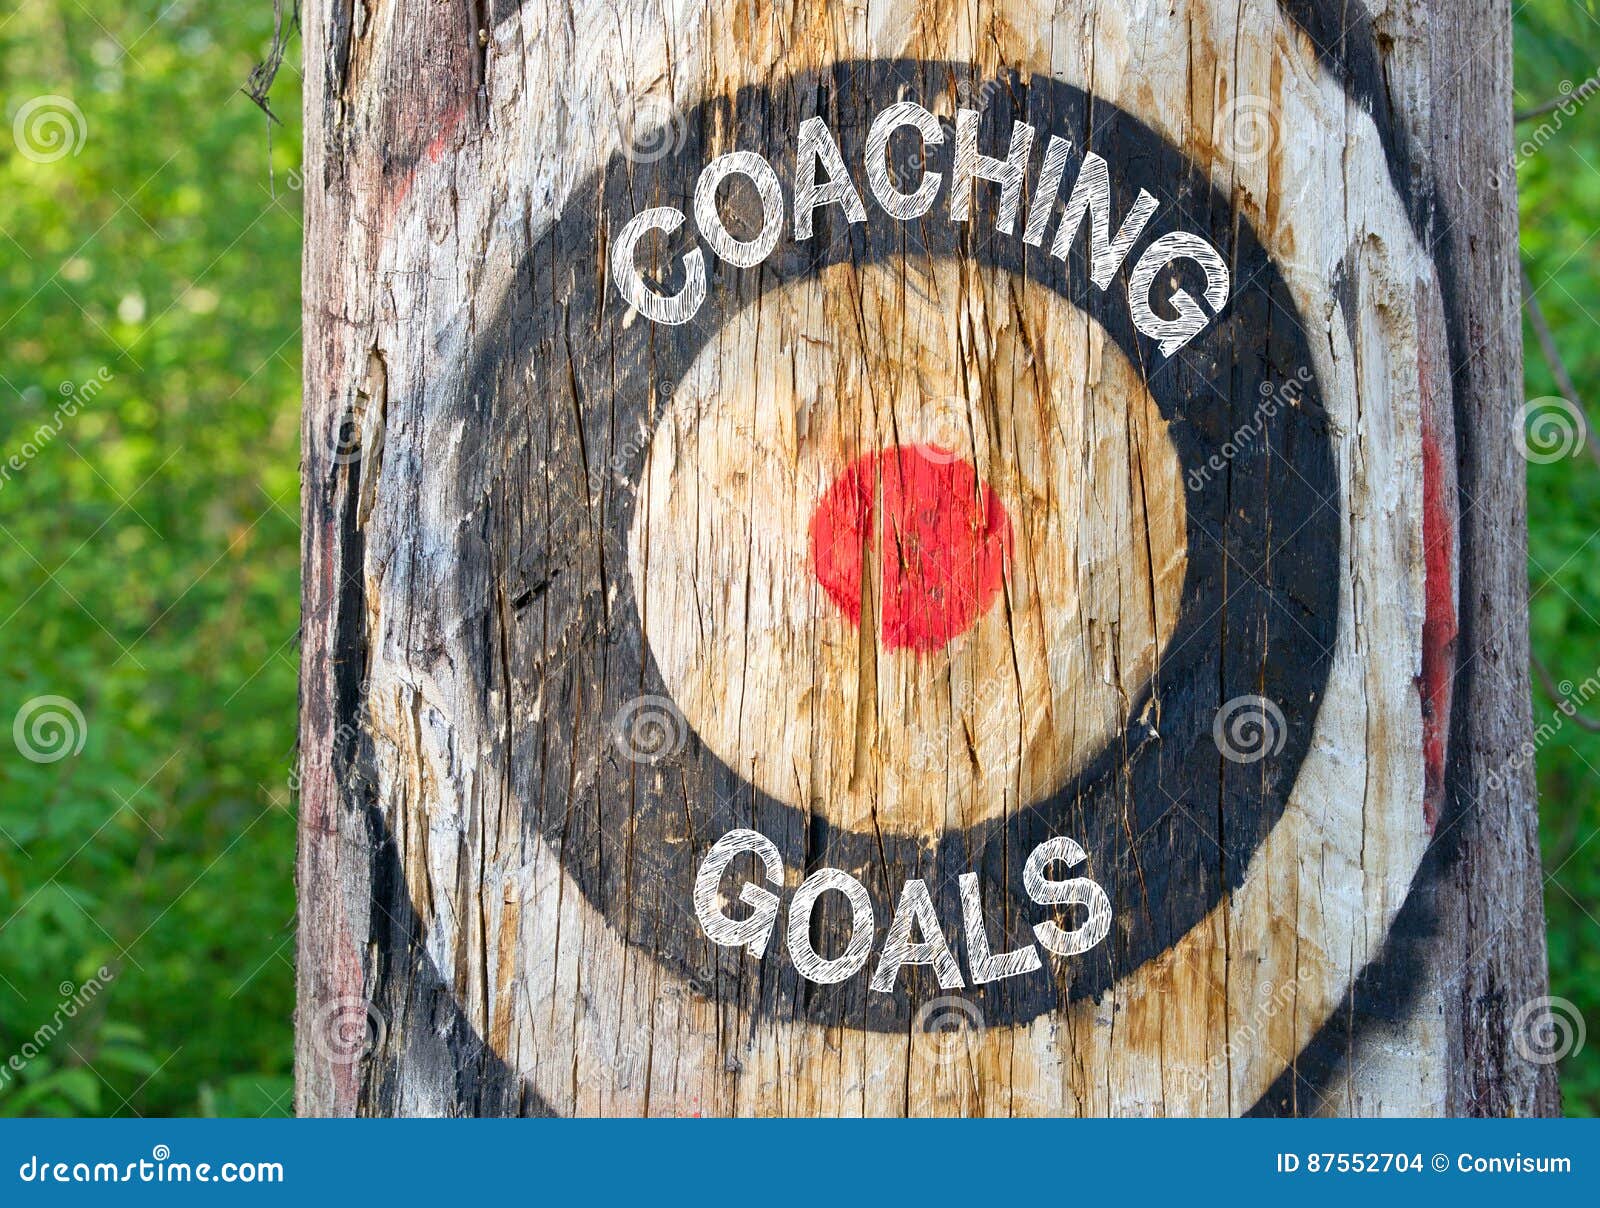 coaching goals - tree with target and text